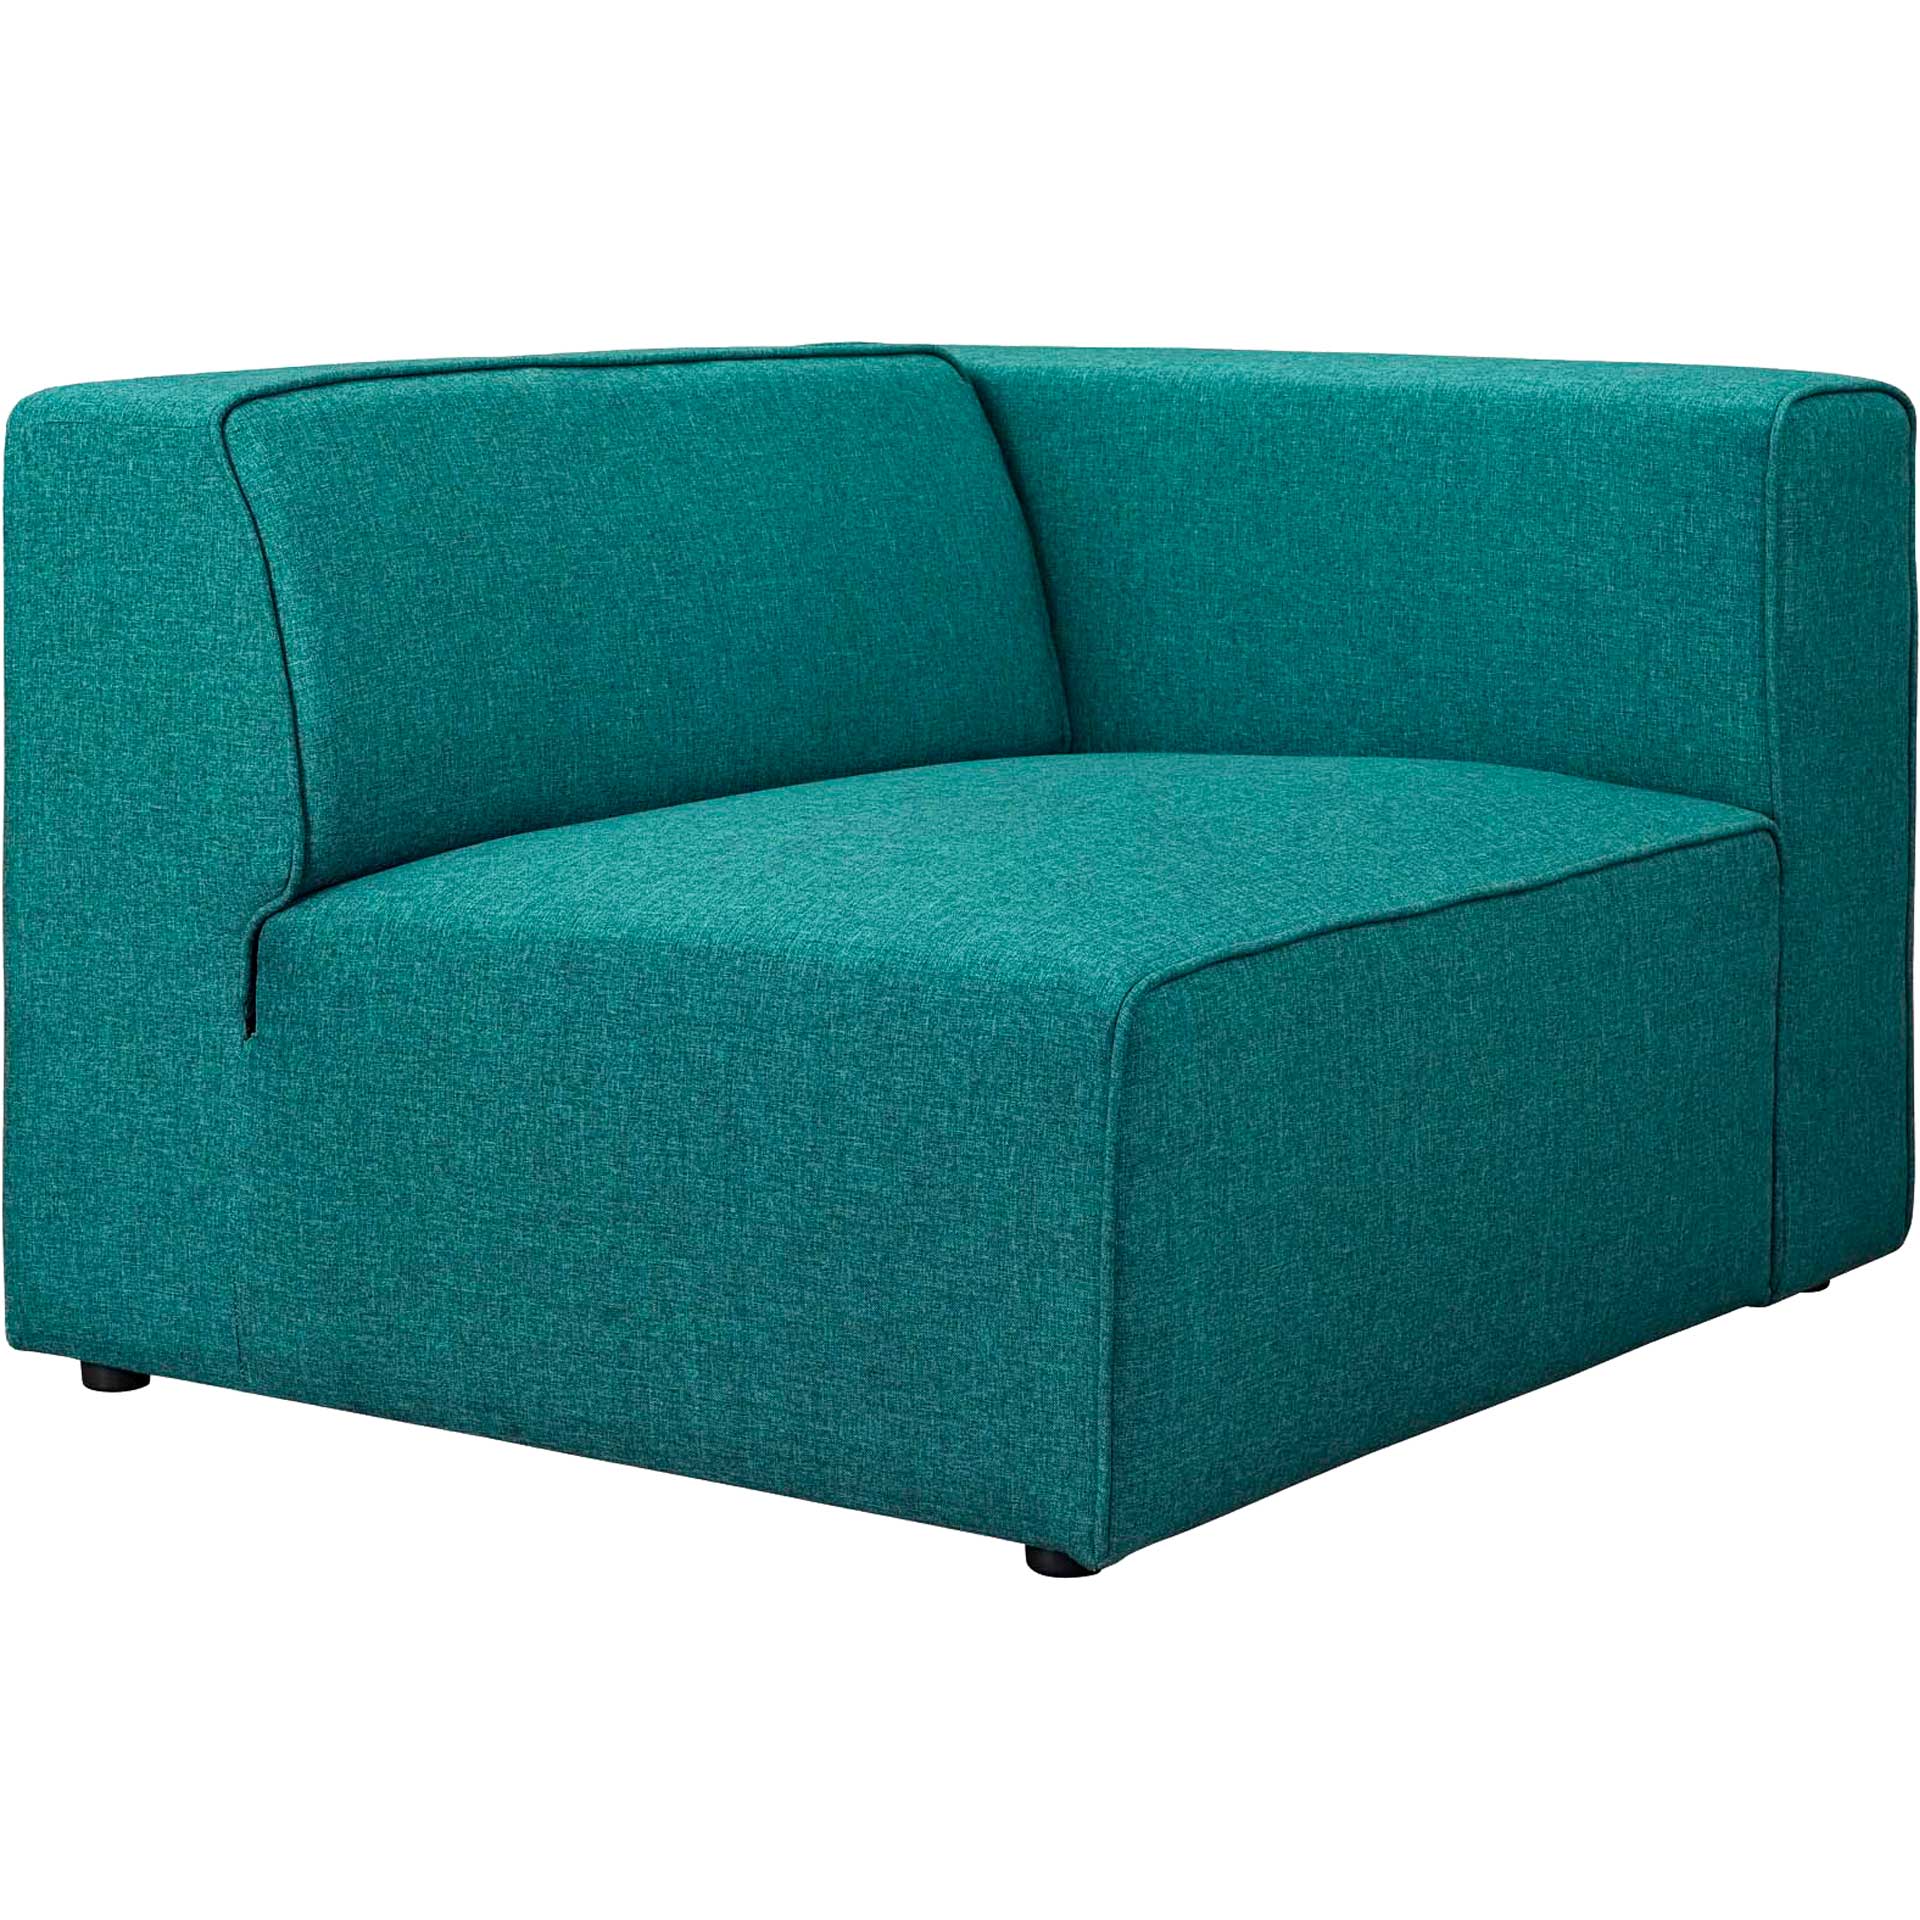 Maisie 7 Piece L-Shaped Sectional Sofa Teal